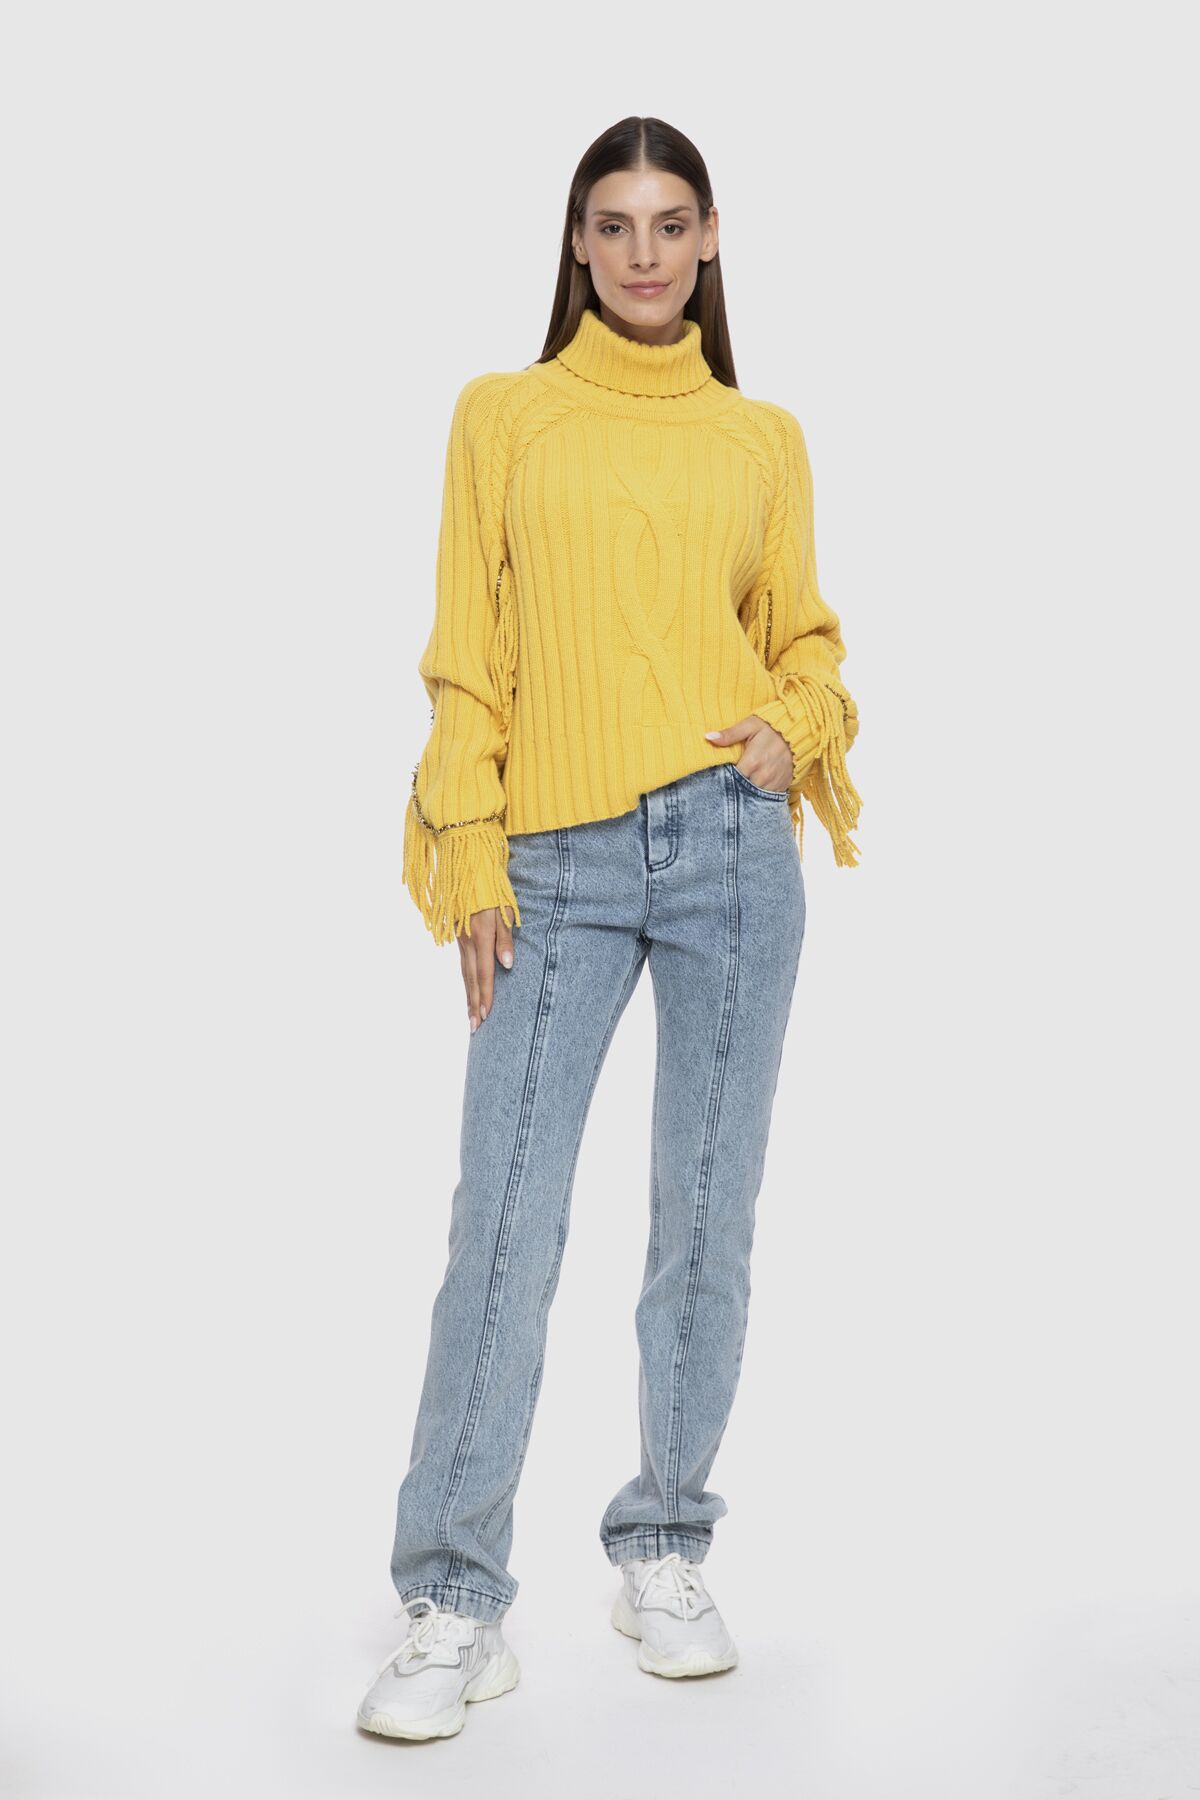  GIZIA - Tassel And Embroidery Detailed Trace Braided Turtleneck Yellow Knitwear Sweater